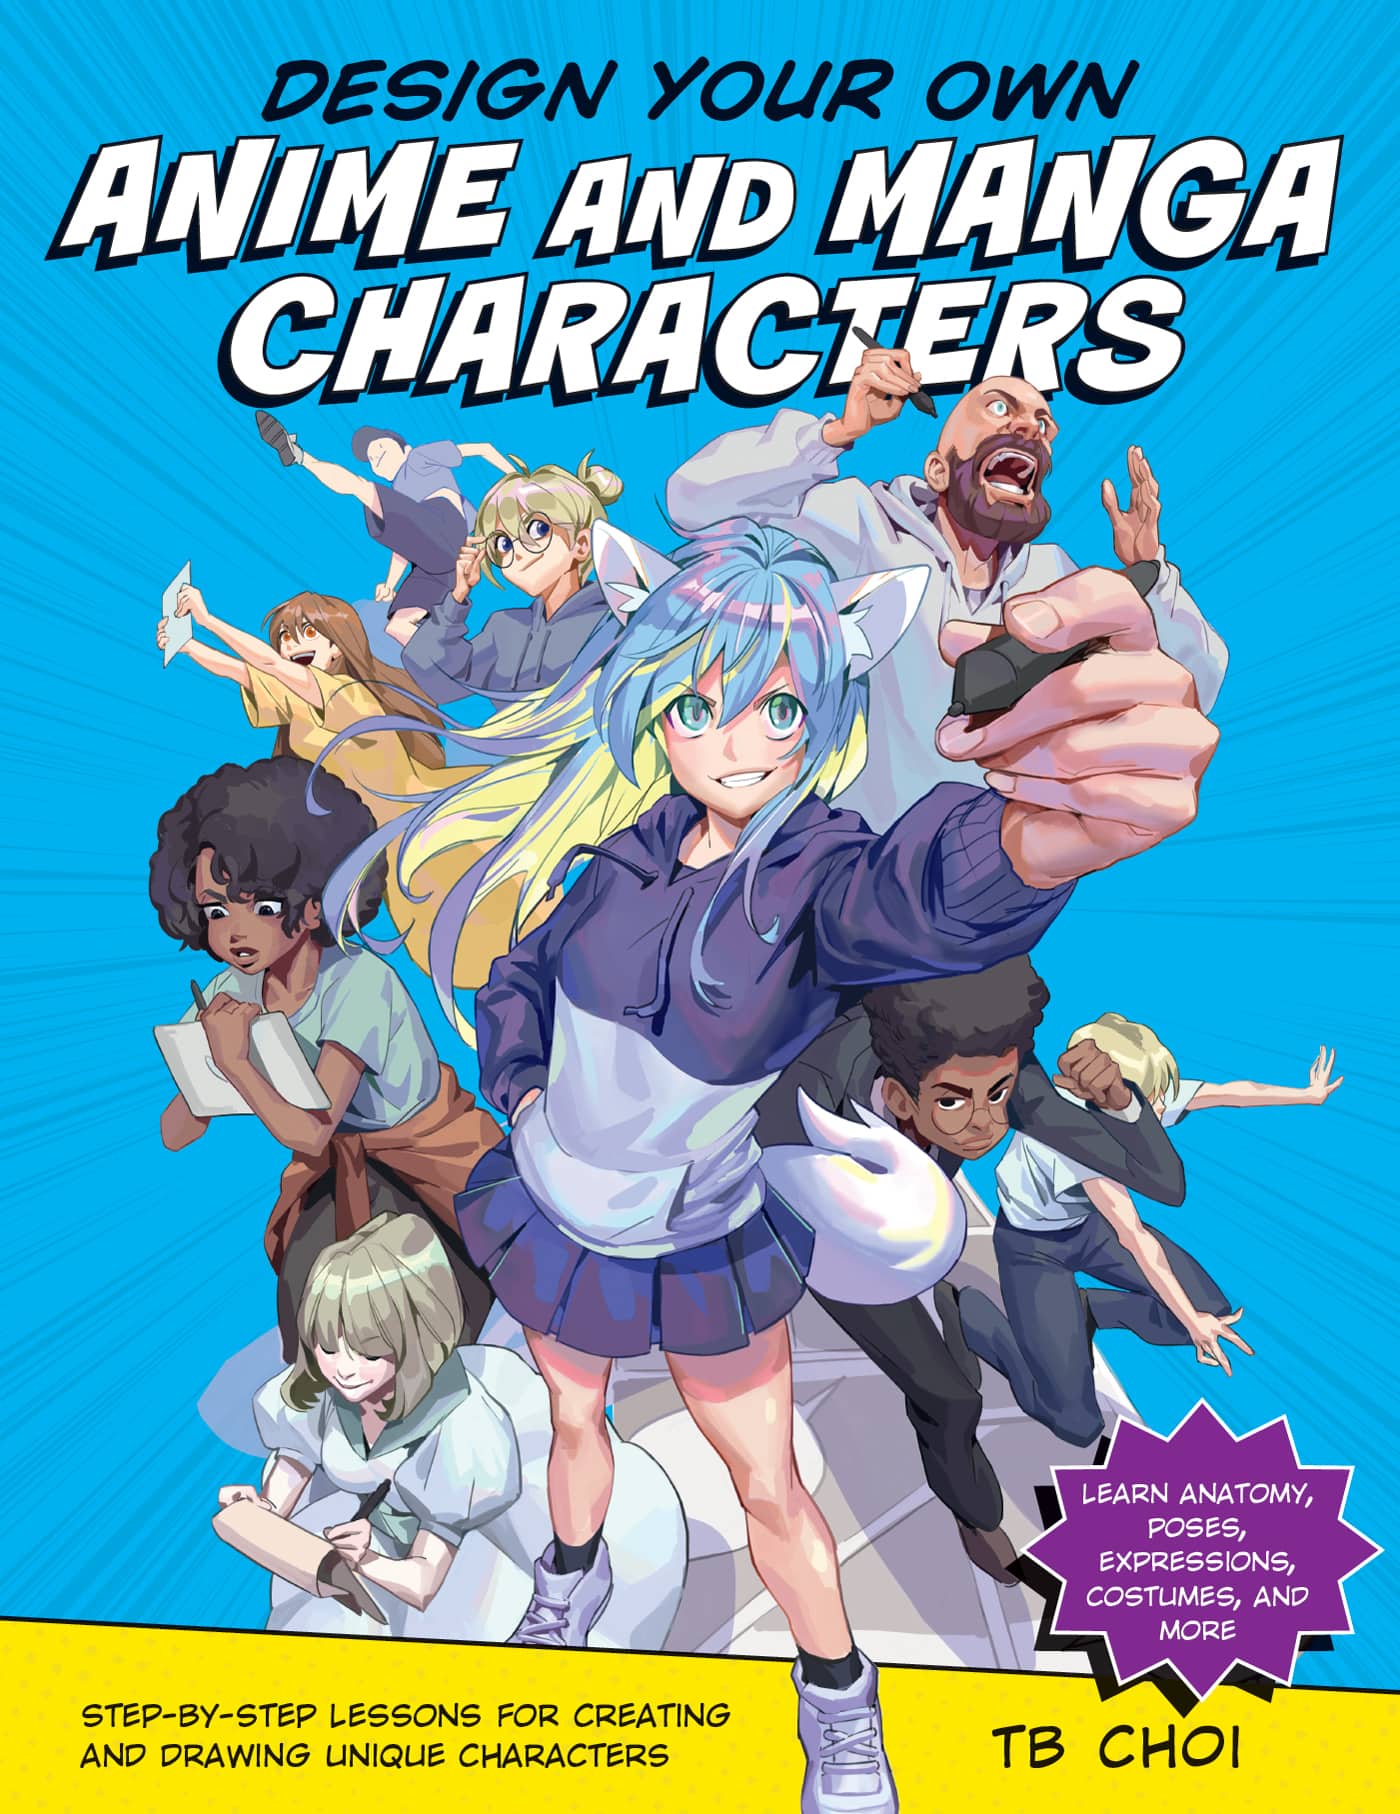 The Master Guide to Drawing Anime How to Draw Original Characters from  Simple Templates by Christopher Hart Paperback  Barnes  Noble